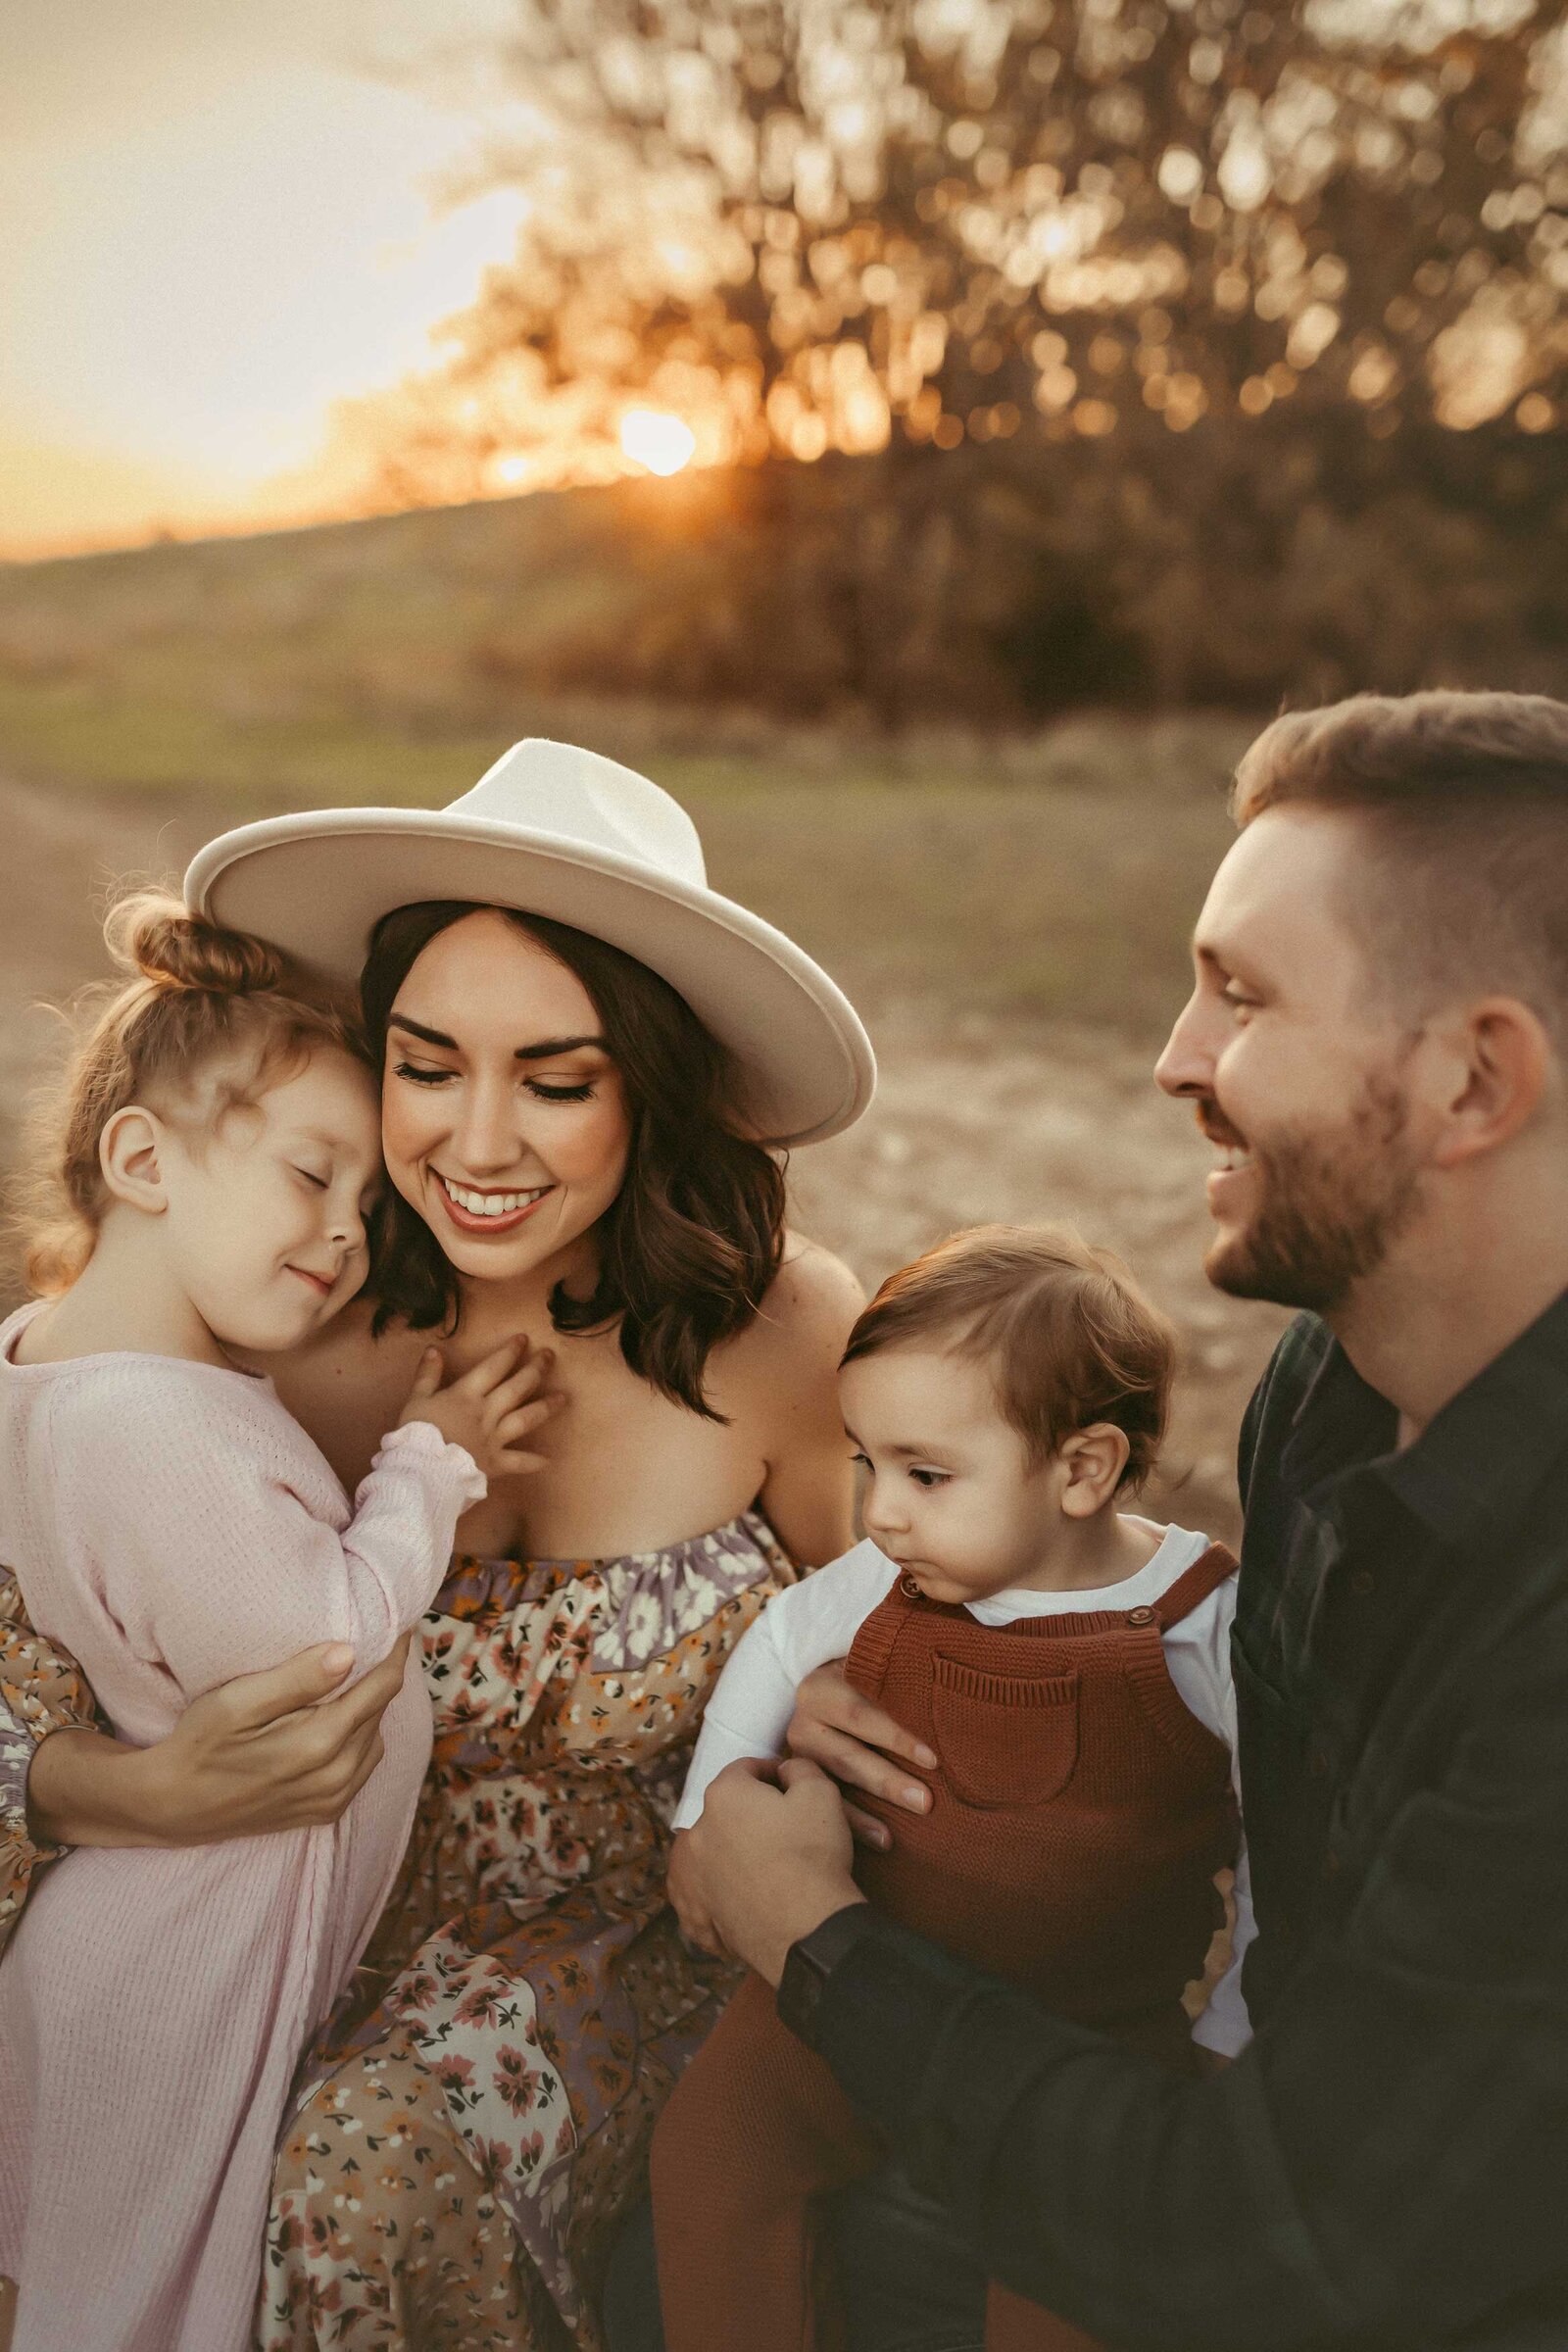 Baby girl is looking at his brother in this sweet family photo taken by Gillan Oler